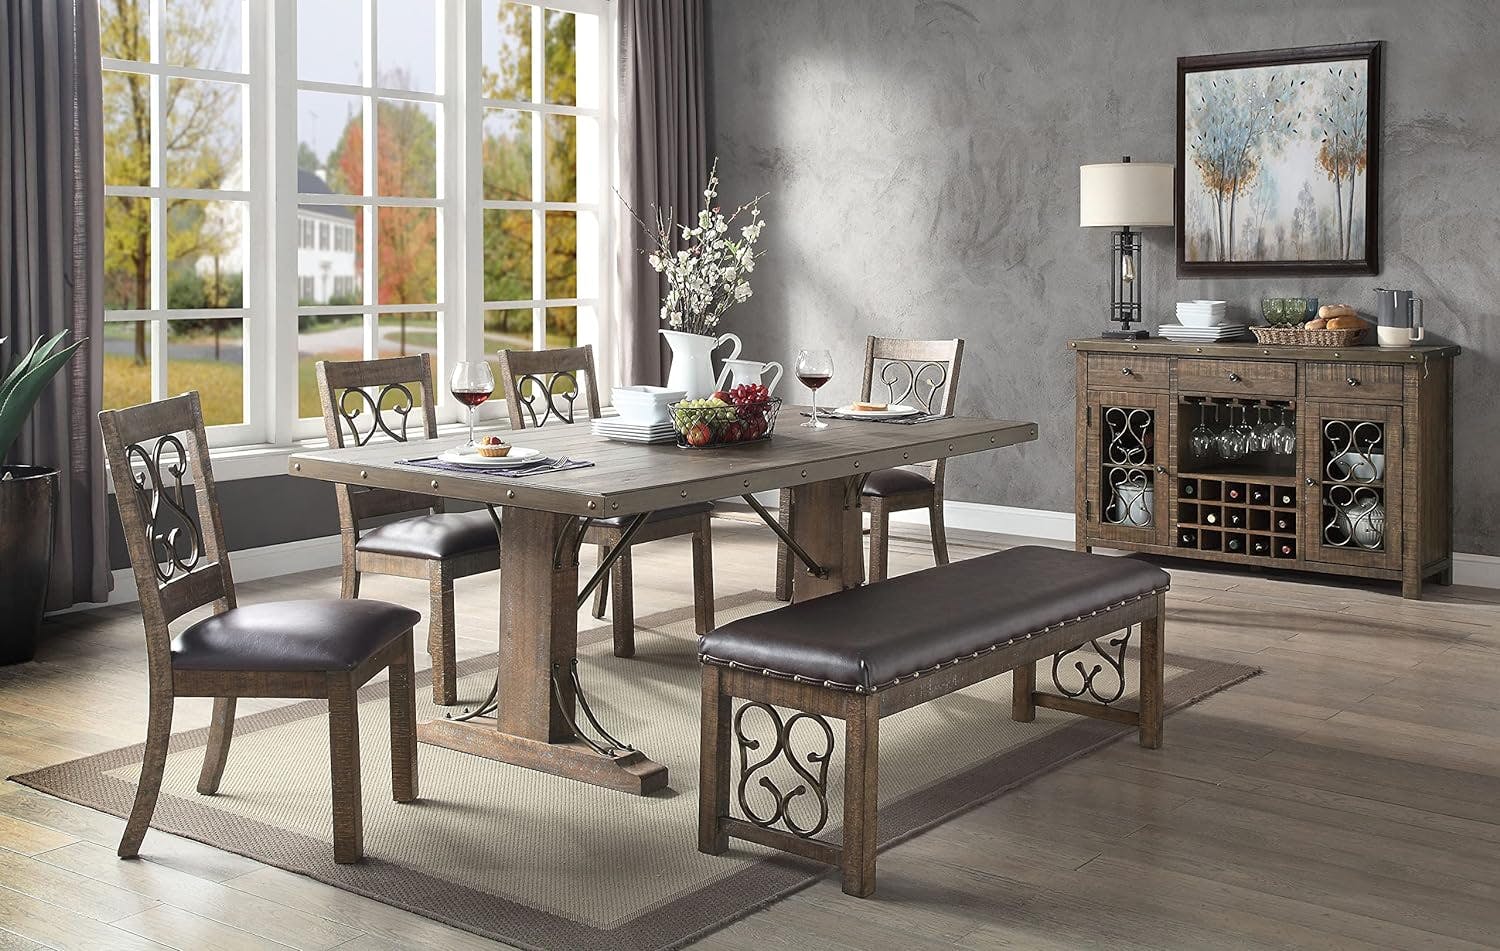 Raphaela 78" Reclaimed Wood Extendable Dining Table in Weathered Cherry